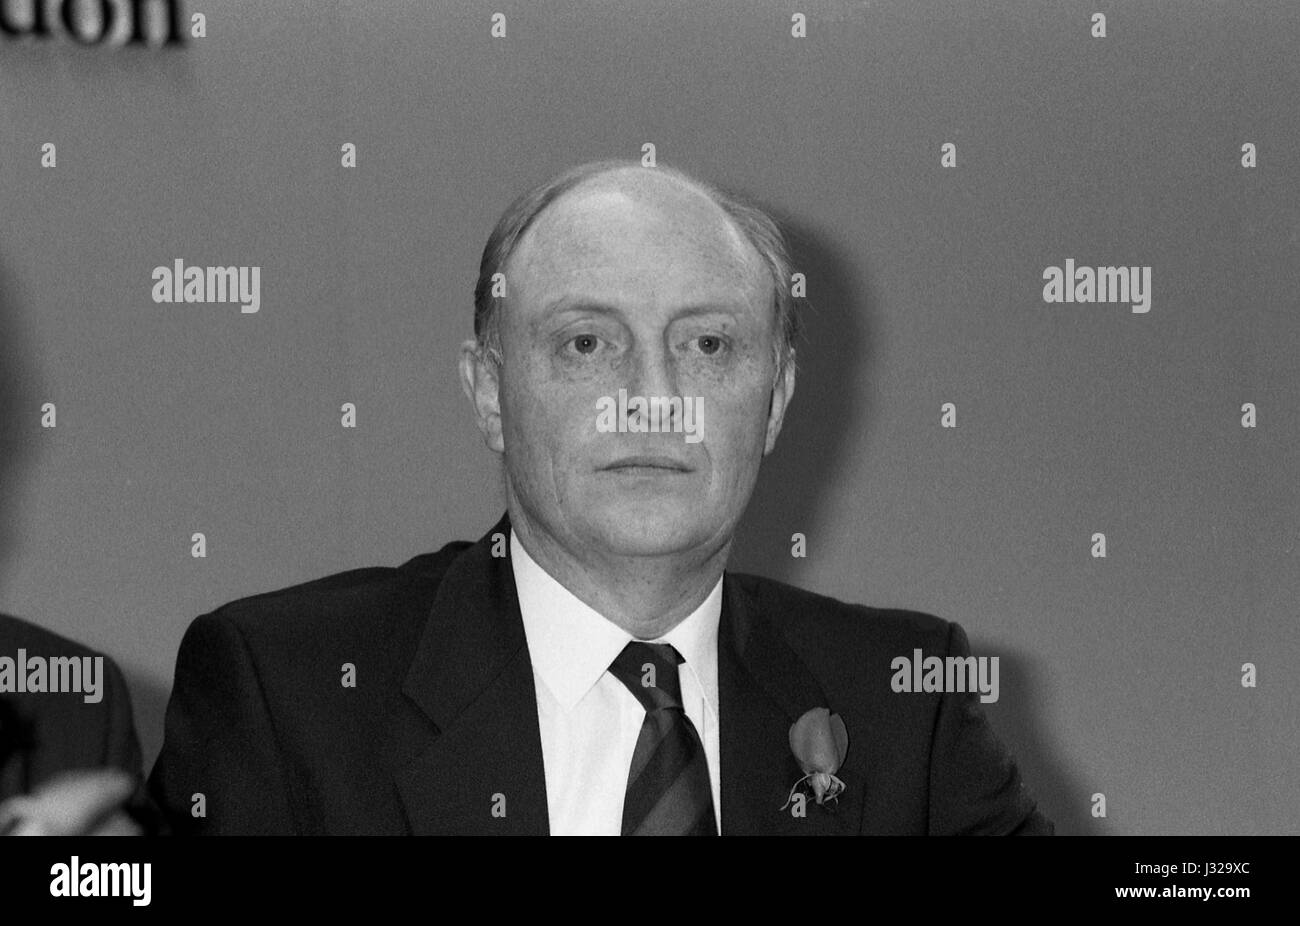 Rt. Hon. Neil Kinnock, Leader of the Labour party, attends a party press conference in London, England on January 29, 1990. Stock Photo